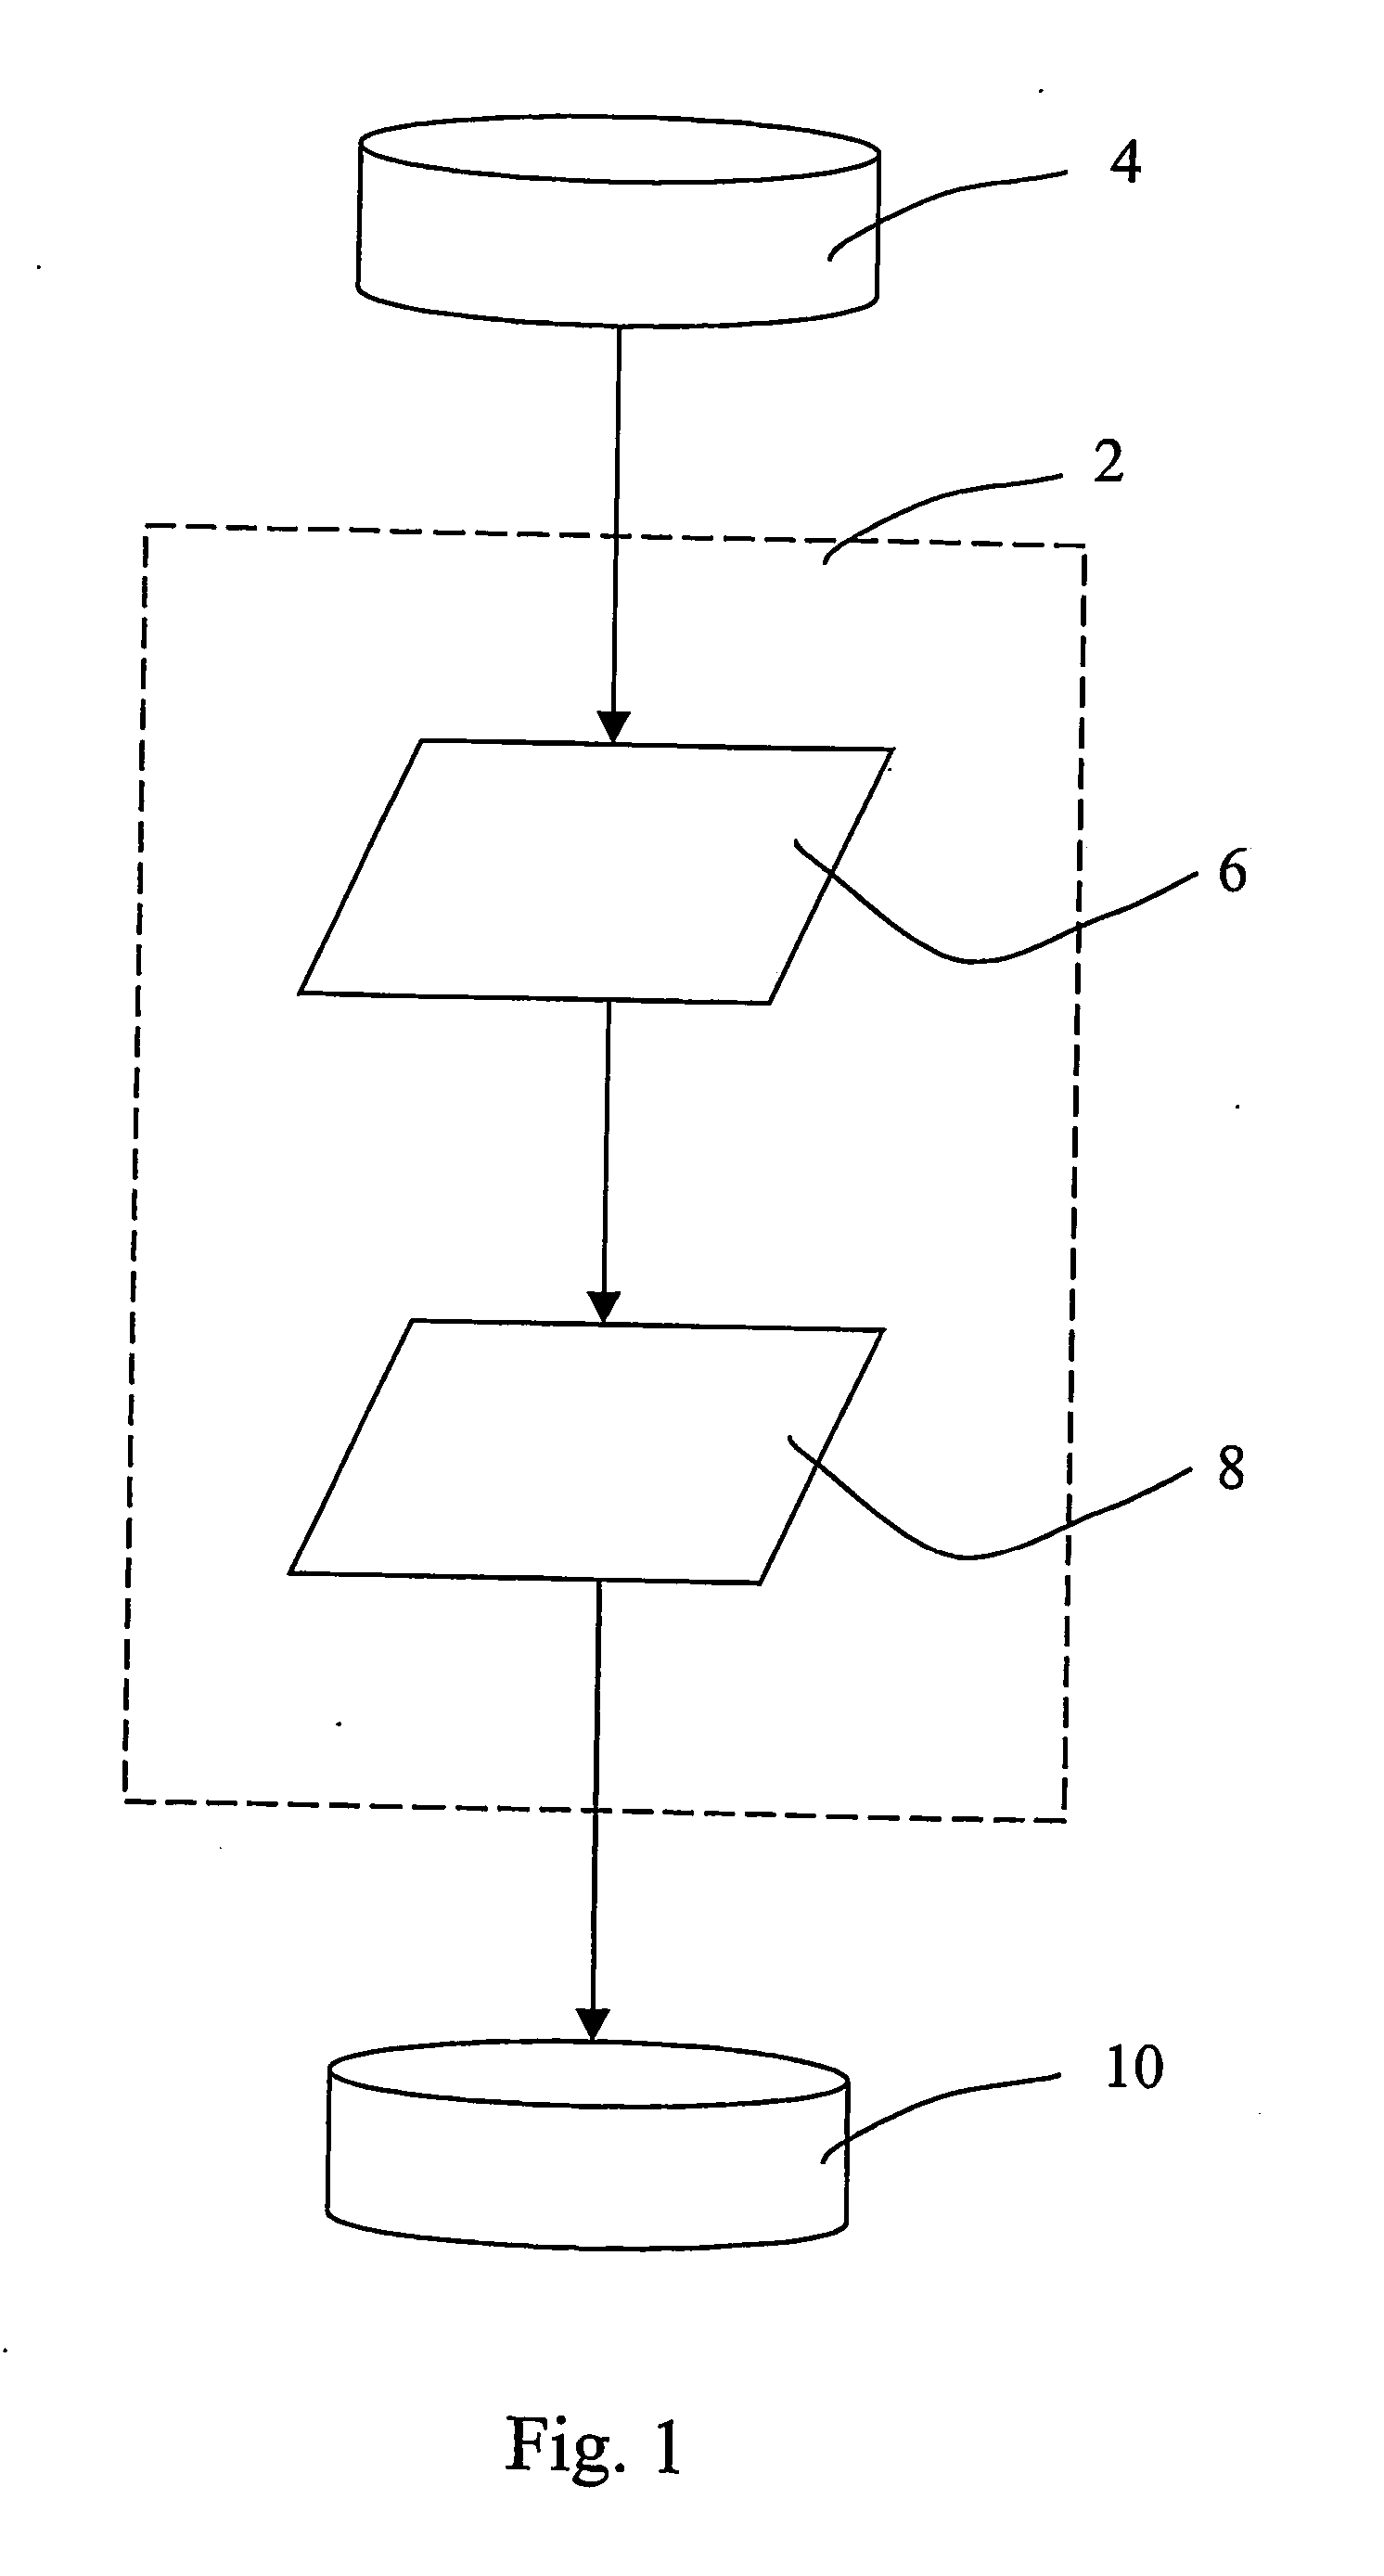 Grapheme to phoneme alignment method and relative rule-set generating system